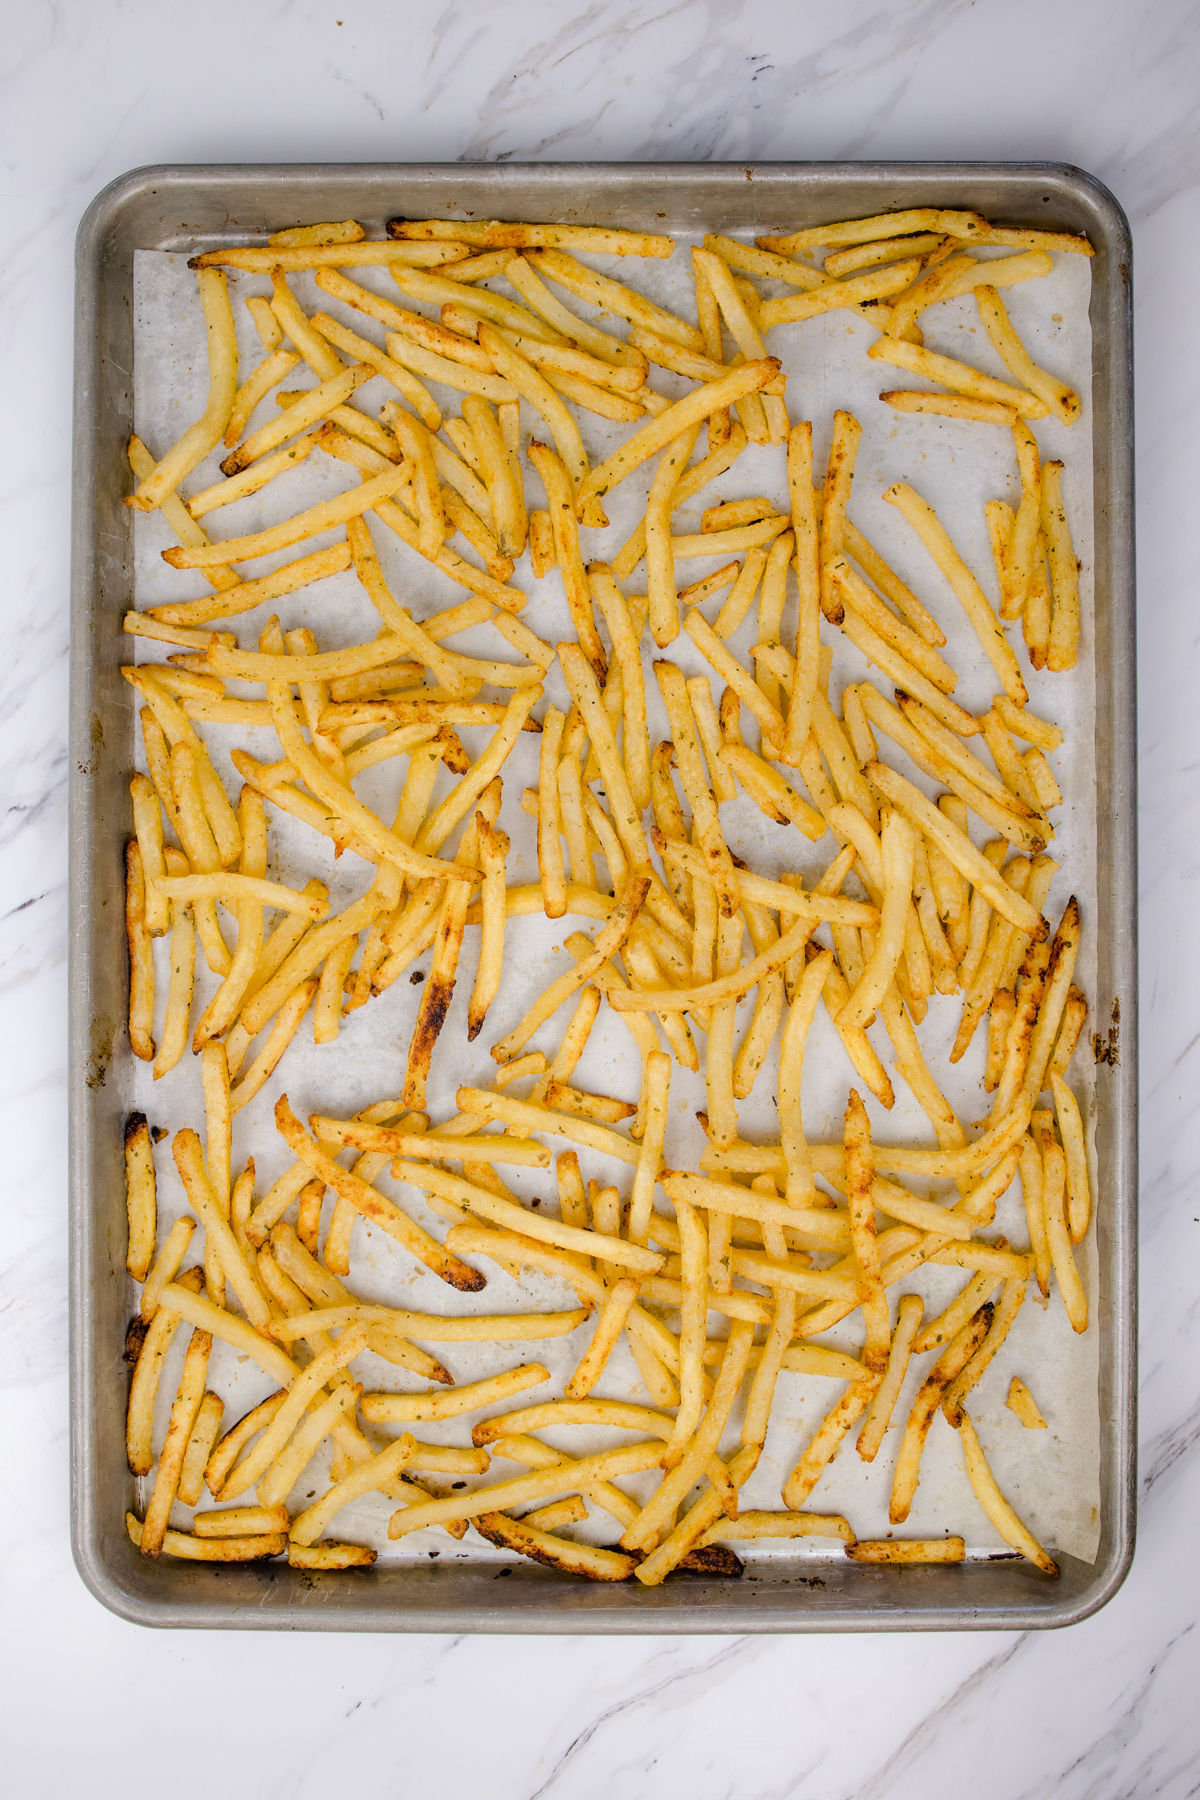 Top view of a baking tray filled with seasoned and part-baked fries. 